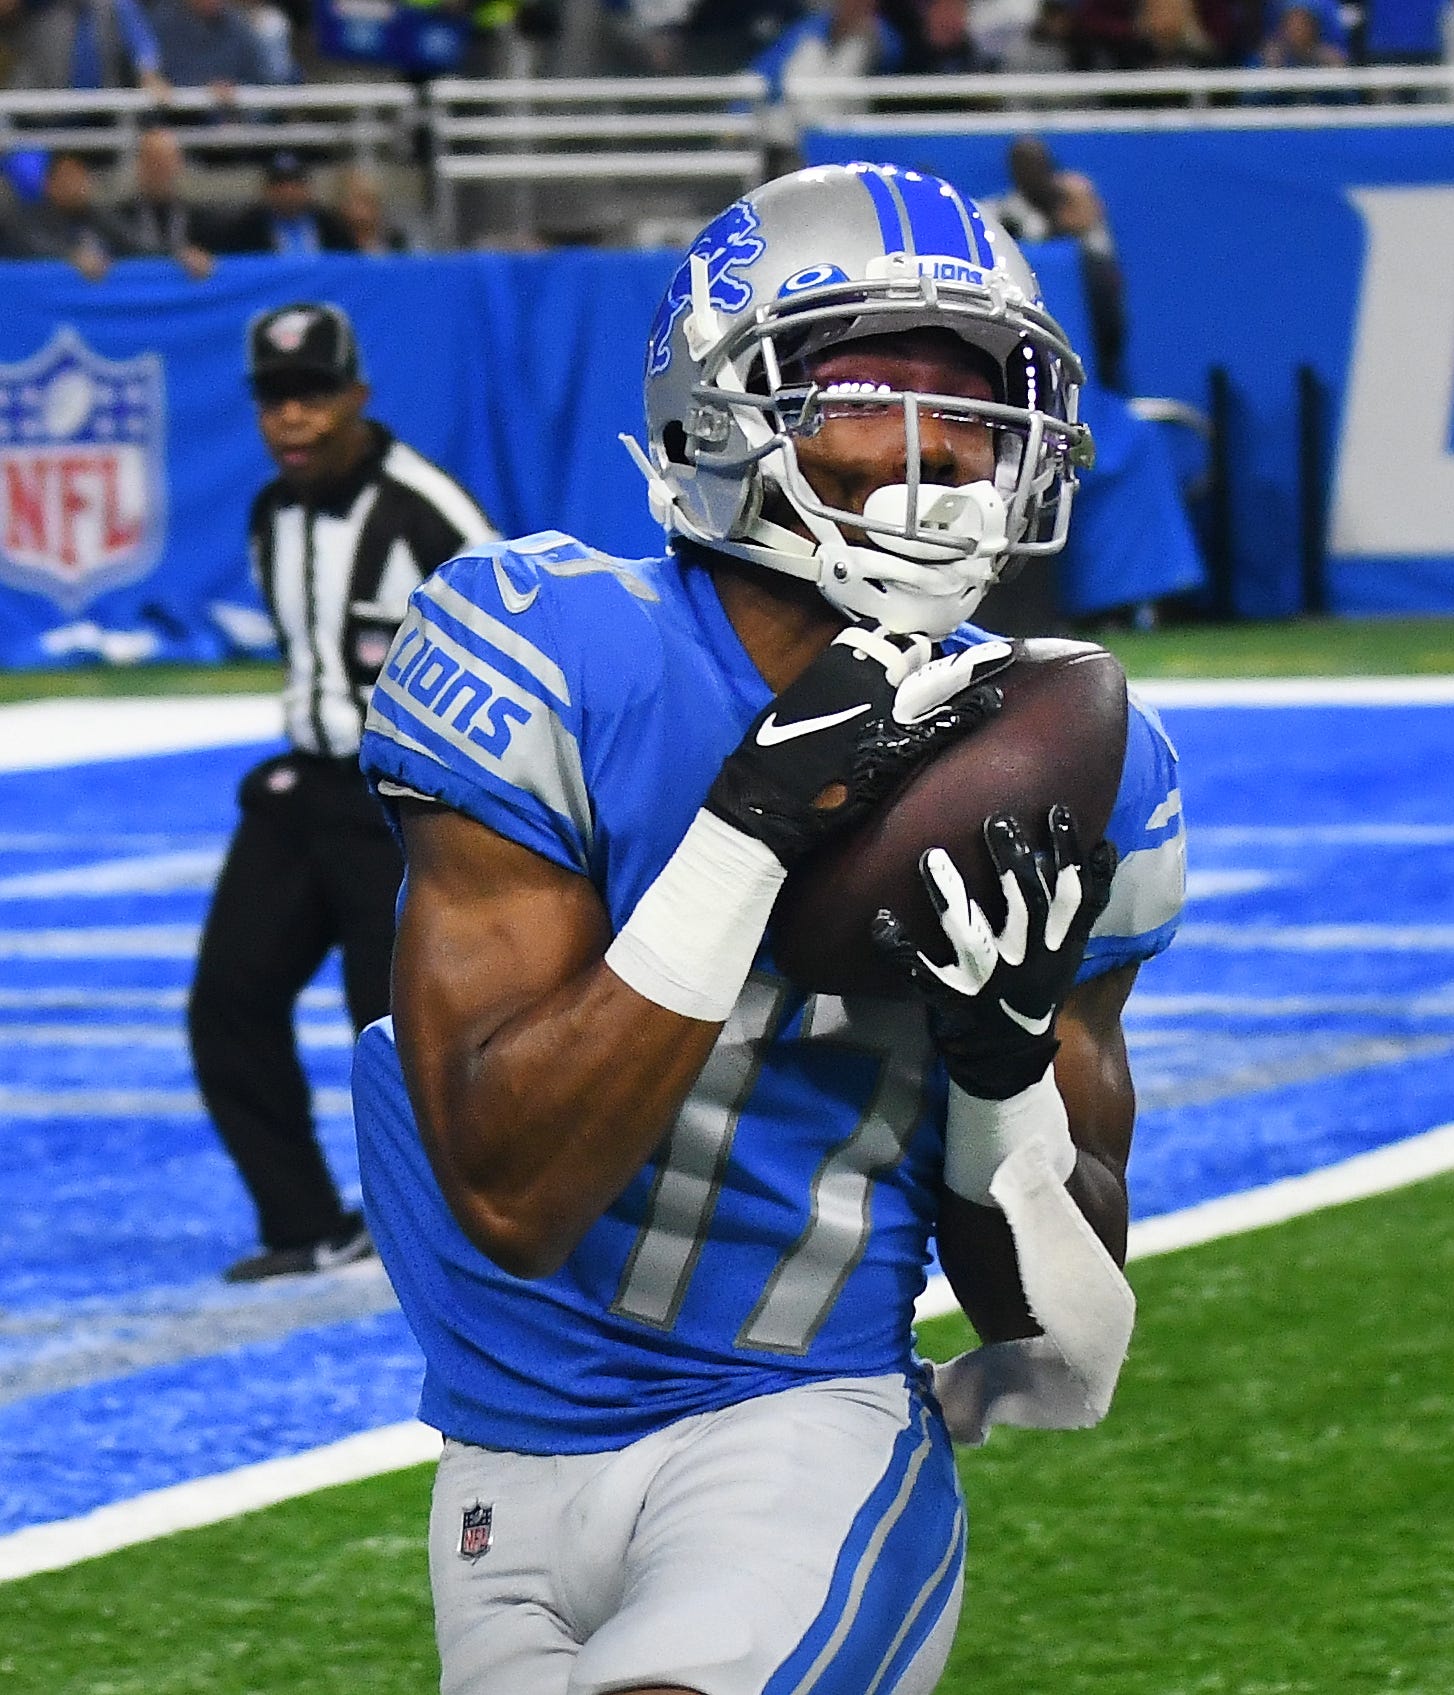 Receiver Marvin Hall was waived by the Lions on Friday.